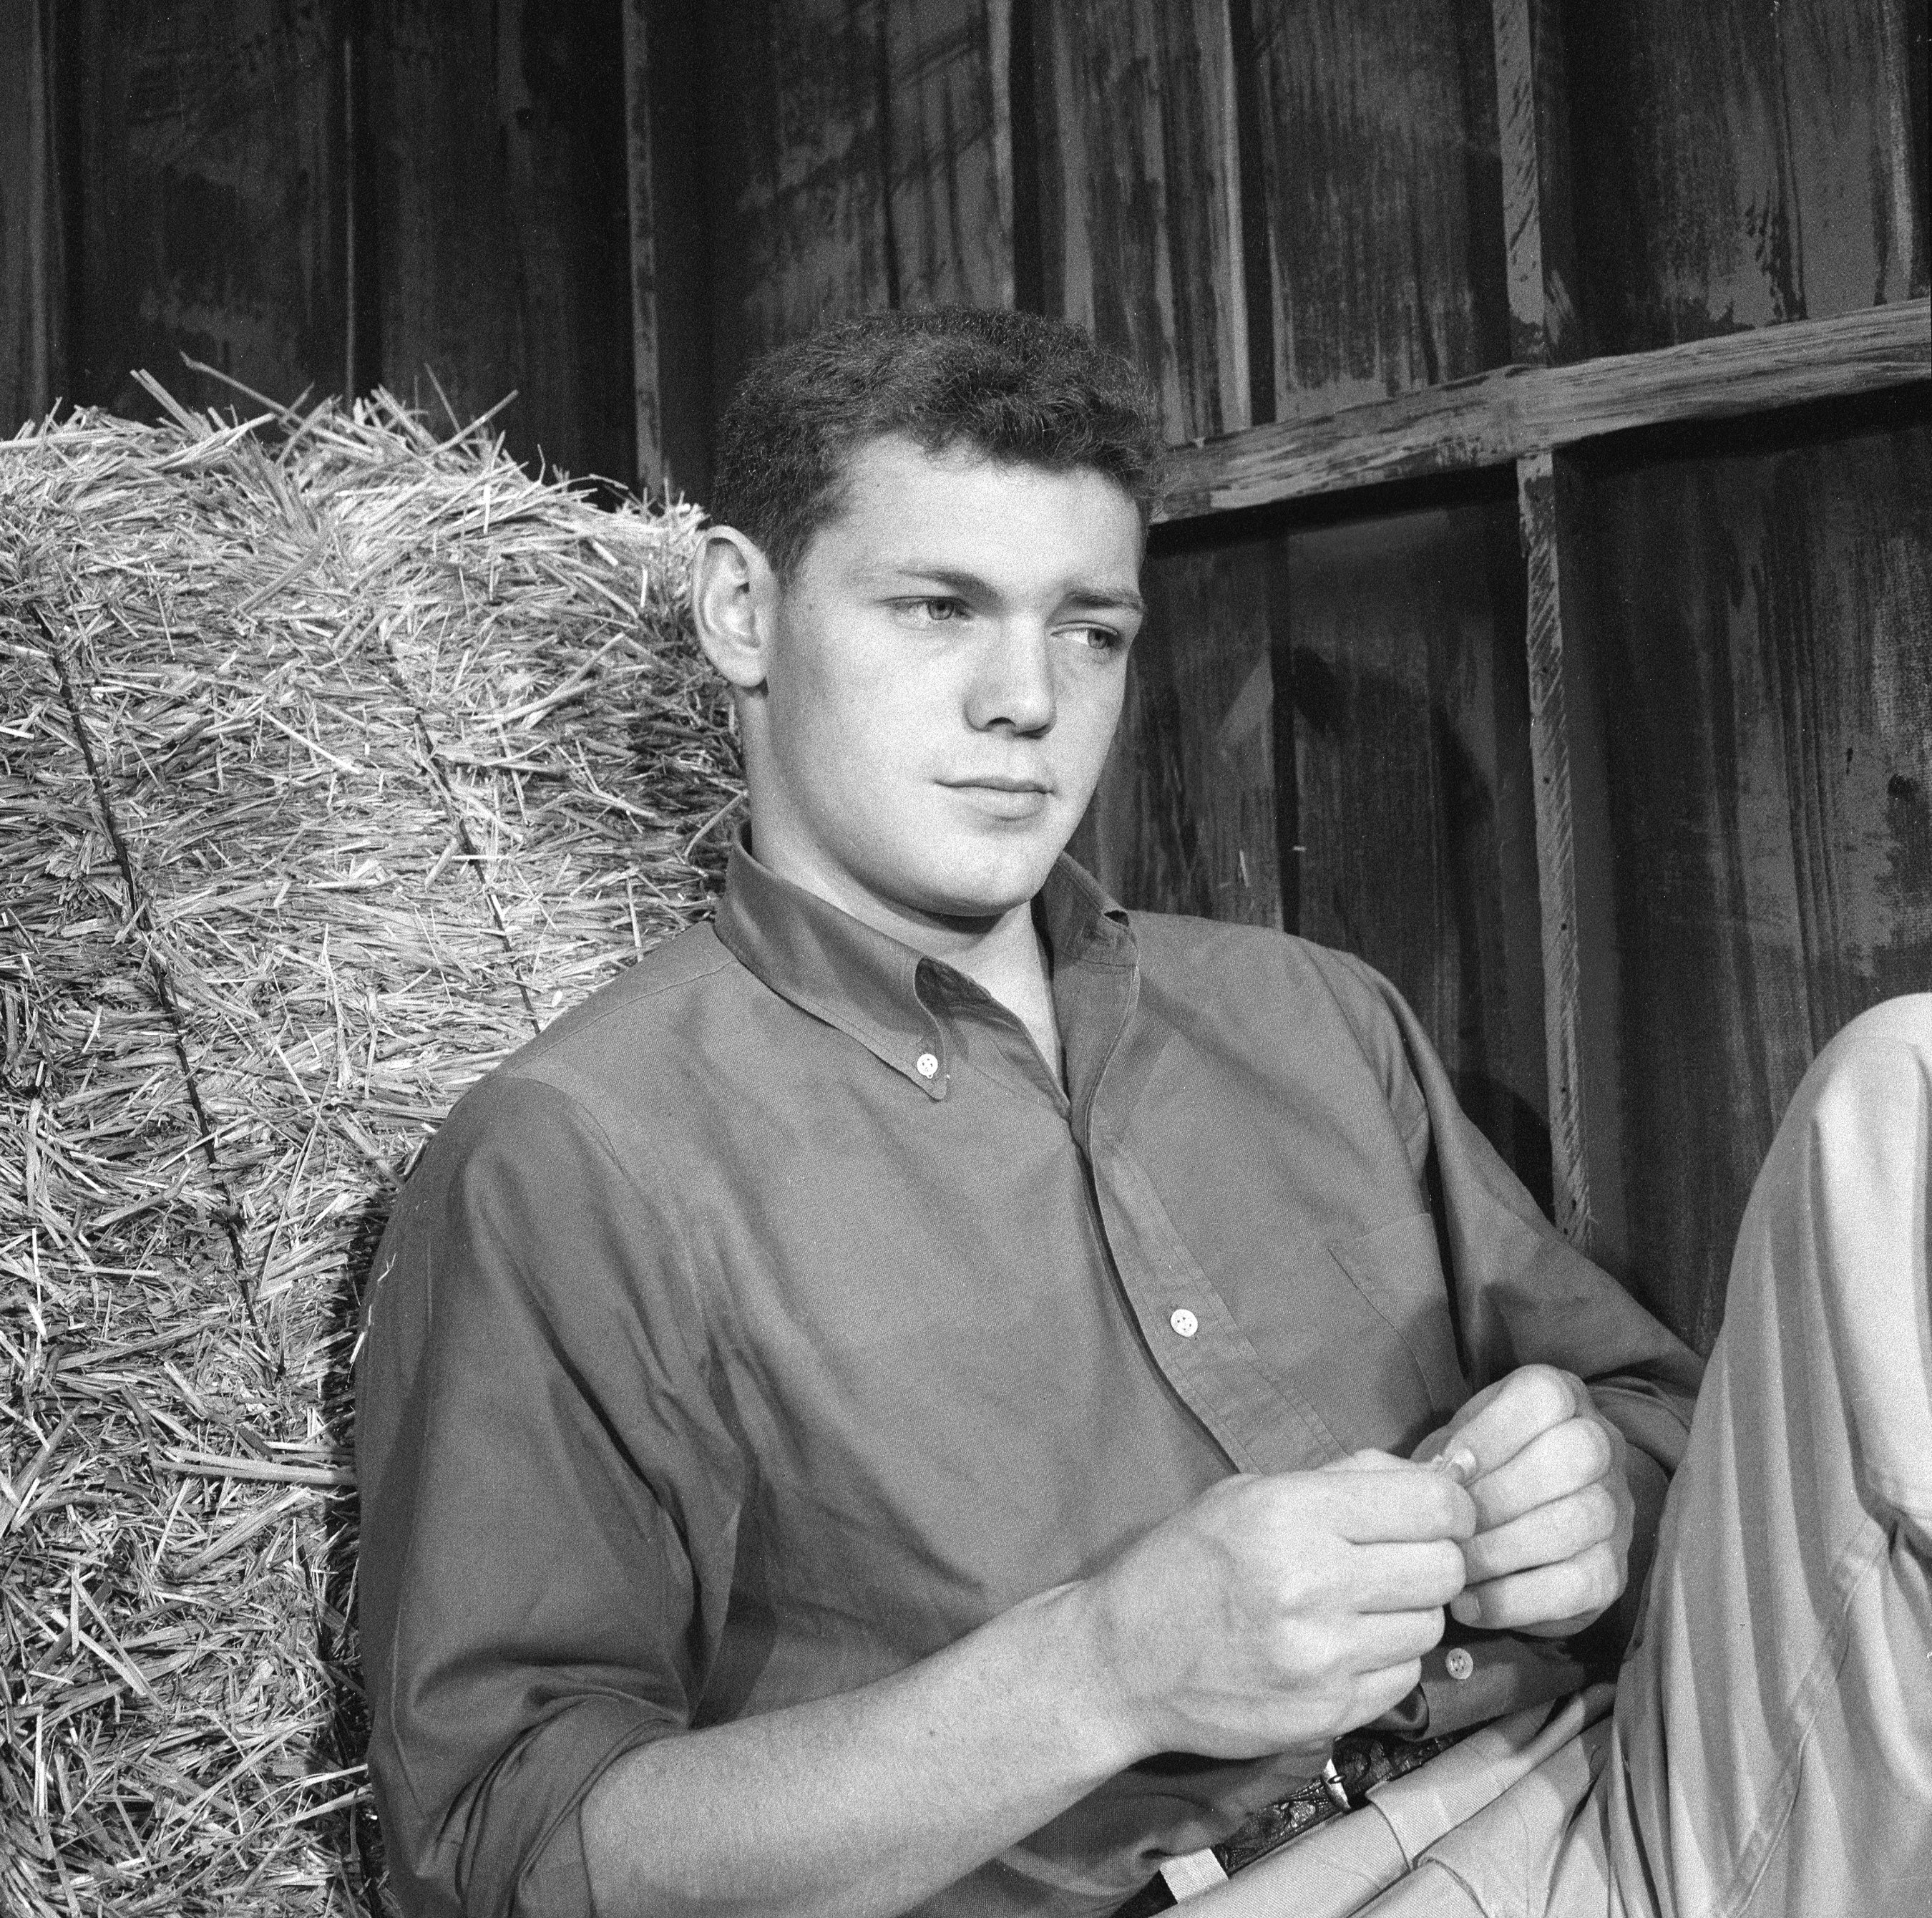 Photo of James MacArthur on the set of "Tongue of Angels" on March 17, 1958 | Source: Getty Images